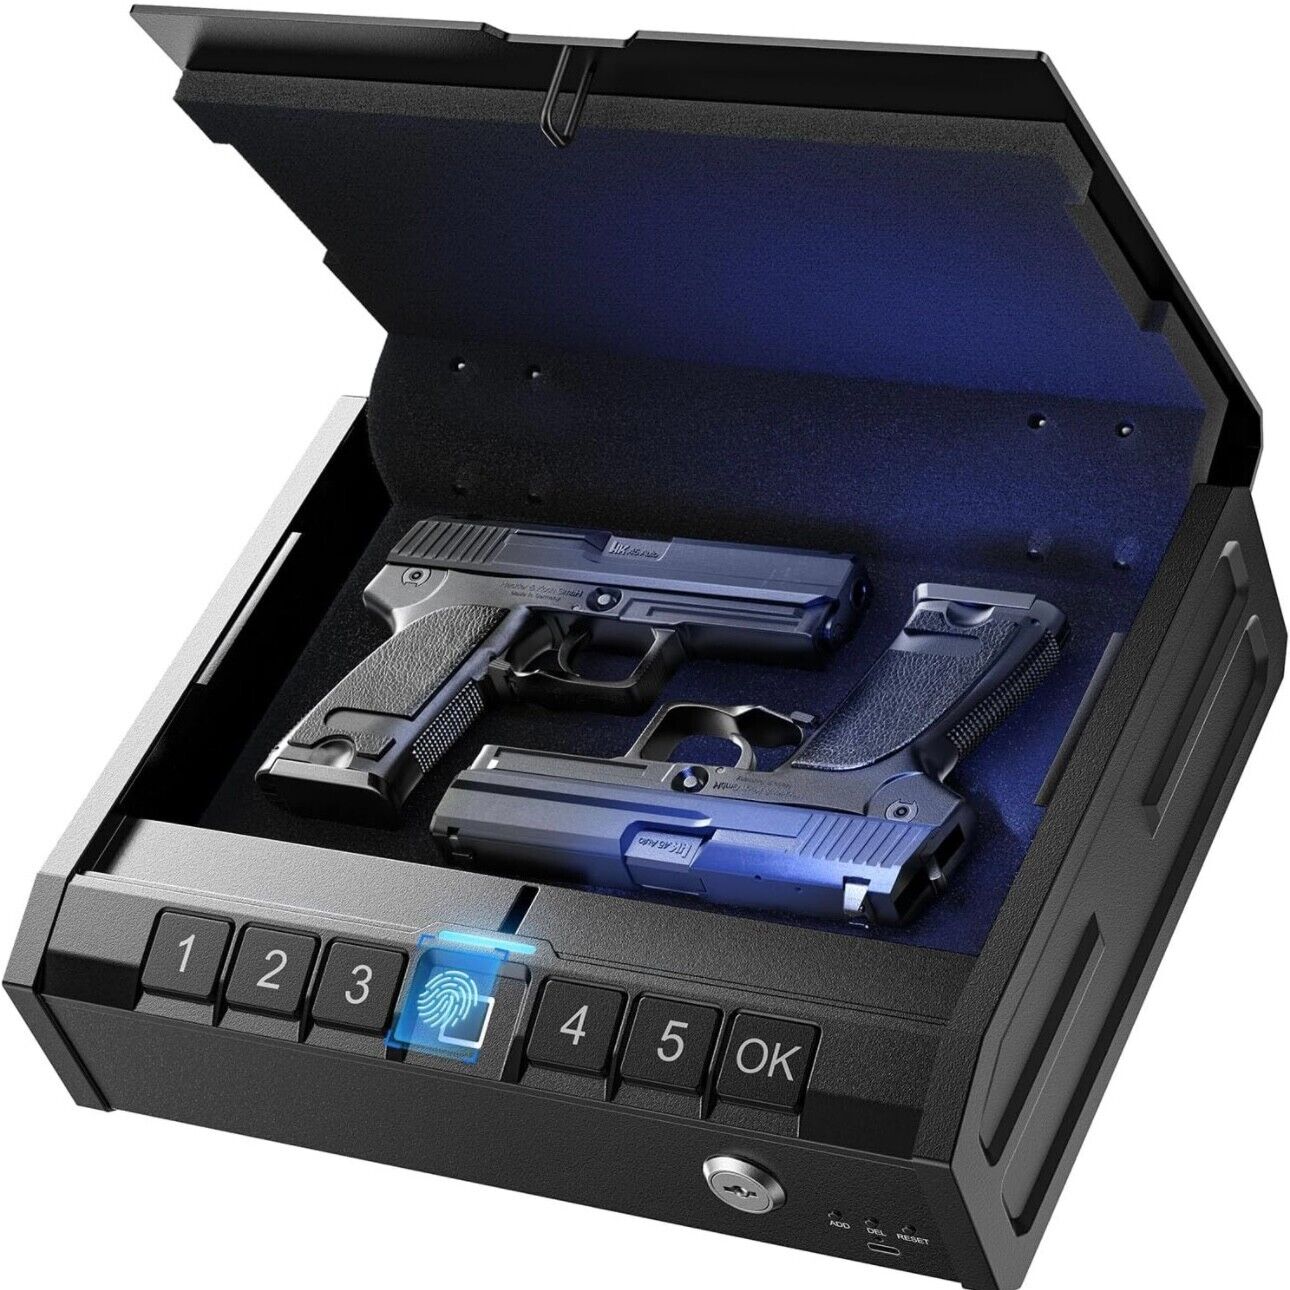 Biometric Gun Safe for Pistols,Handgun, Quick-Access Firearm Safety Device with